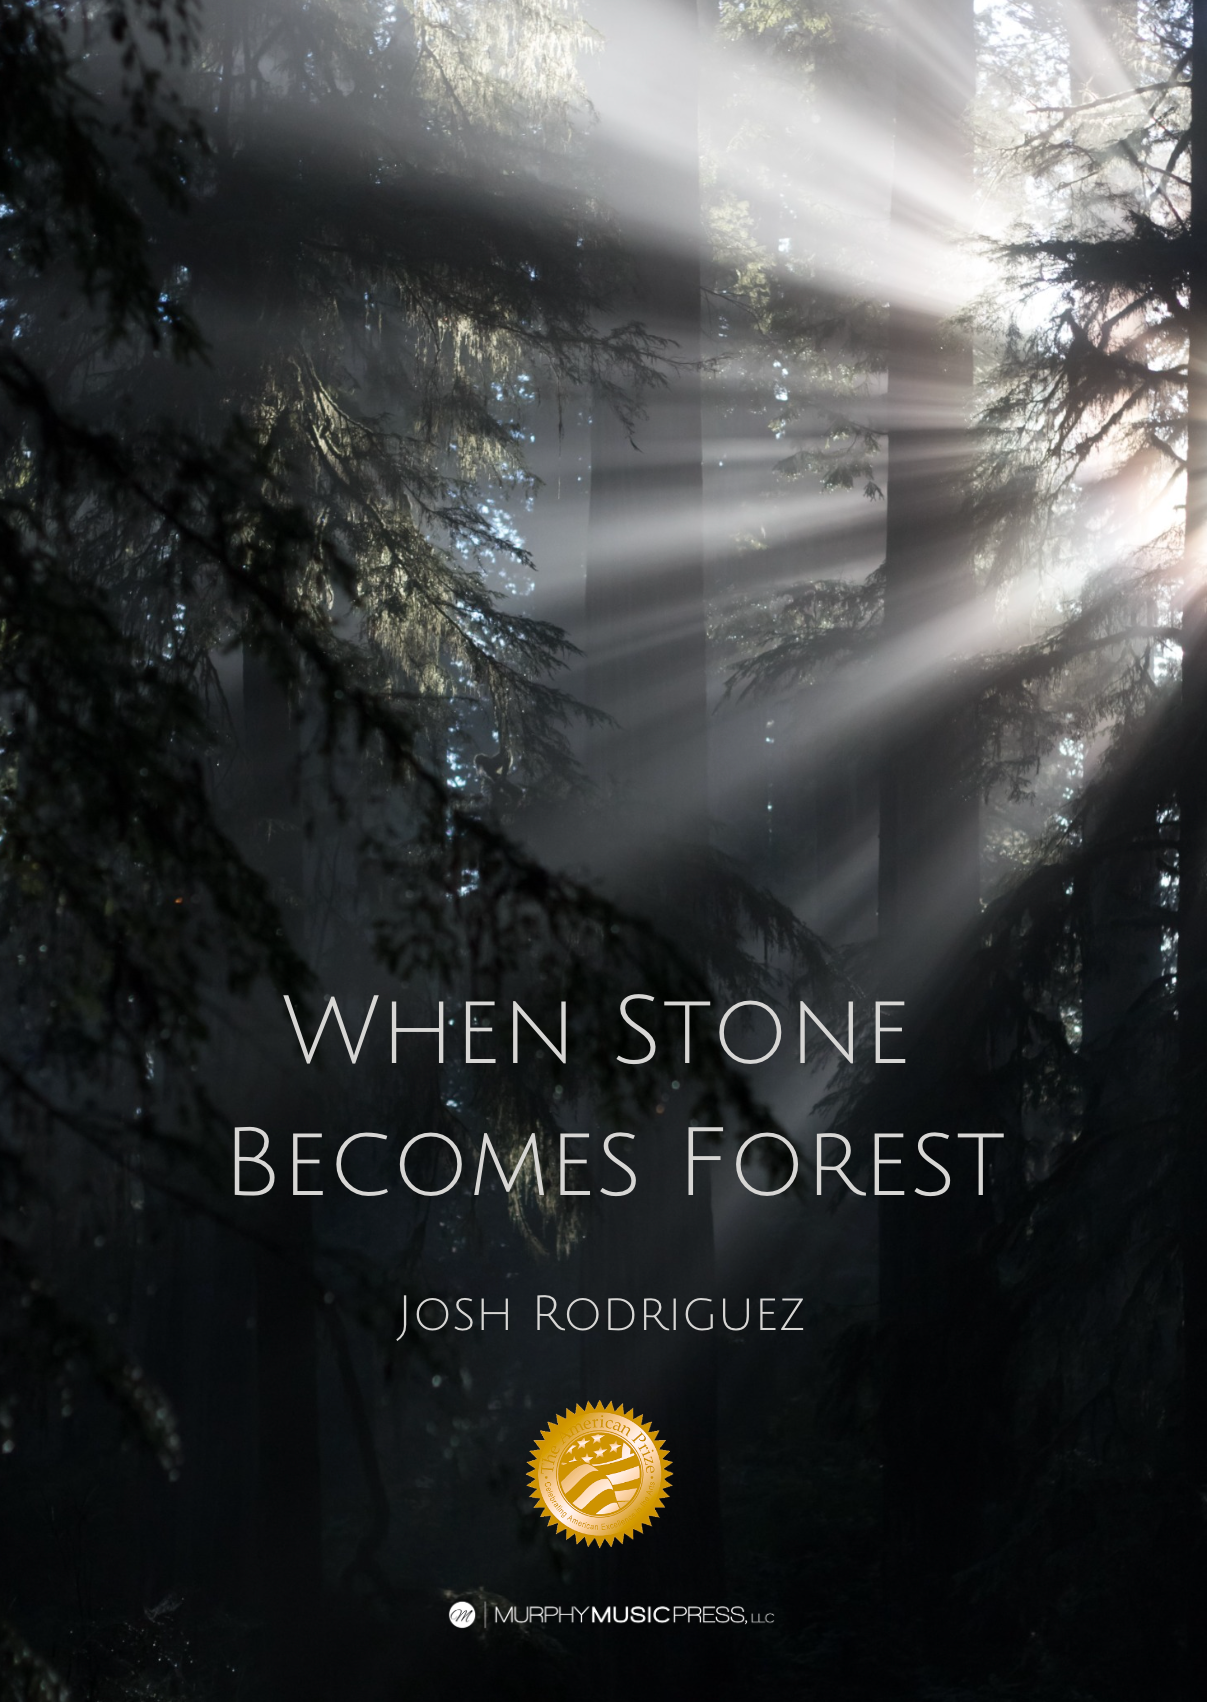 Grade 4 - When Stone Becomes Forest - Josh Rodriguez - Hardcopy Sc & Pts